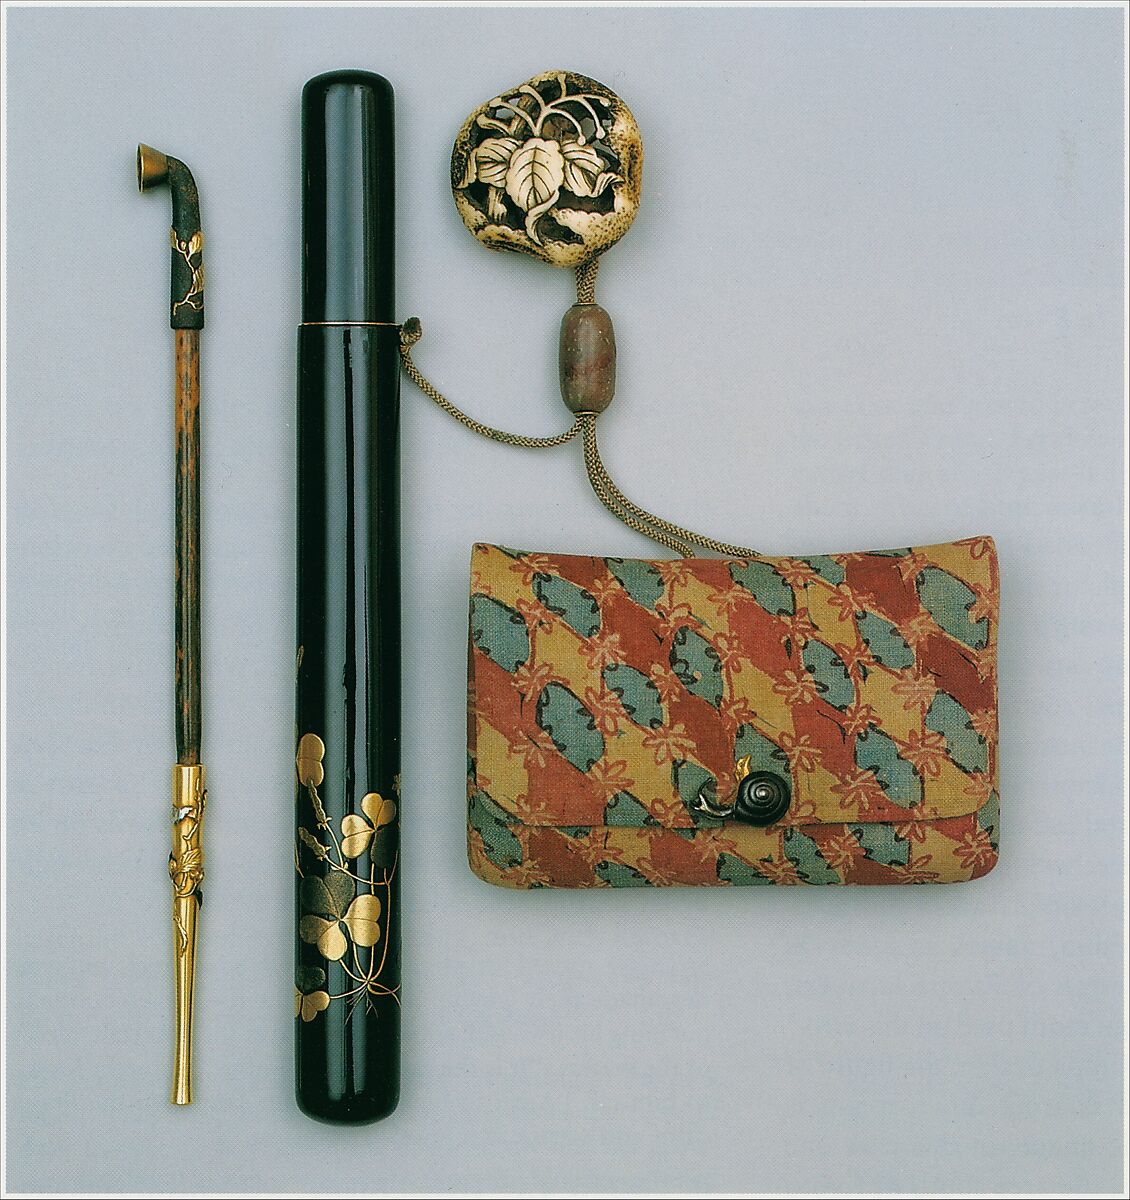 Pipe and Pipe Case with Tobacco Pouch, Shibata Zeshin, Pipe: iron, gold, and silver on wood; case: gold, silver hiramaki‑e on black lacquer; pouch: dyed cotton (sarasa) with metal fitting; netsuke: carved staghorn, Japan